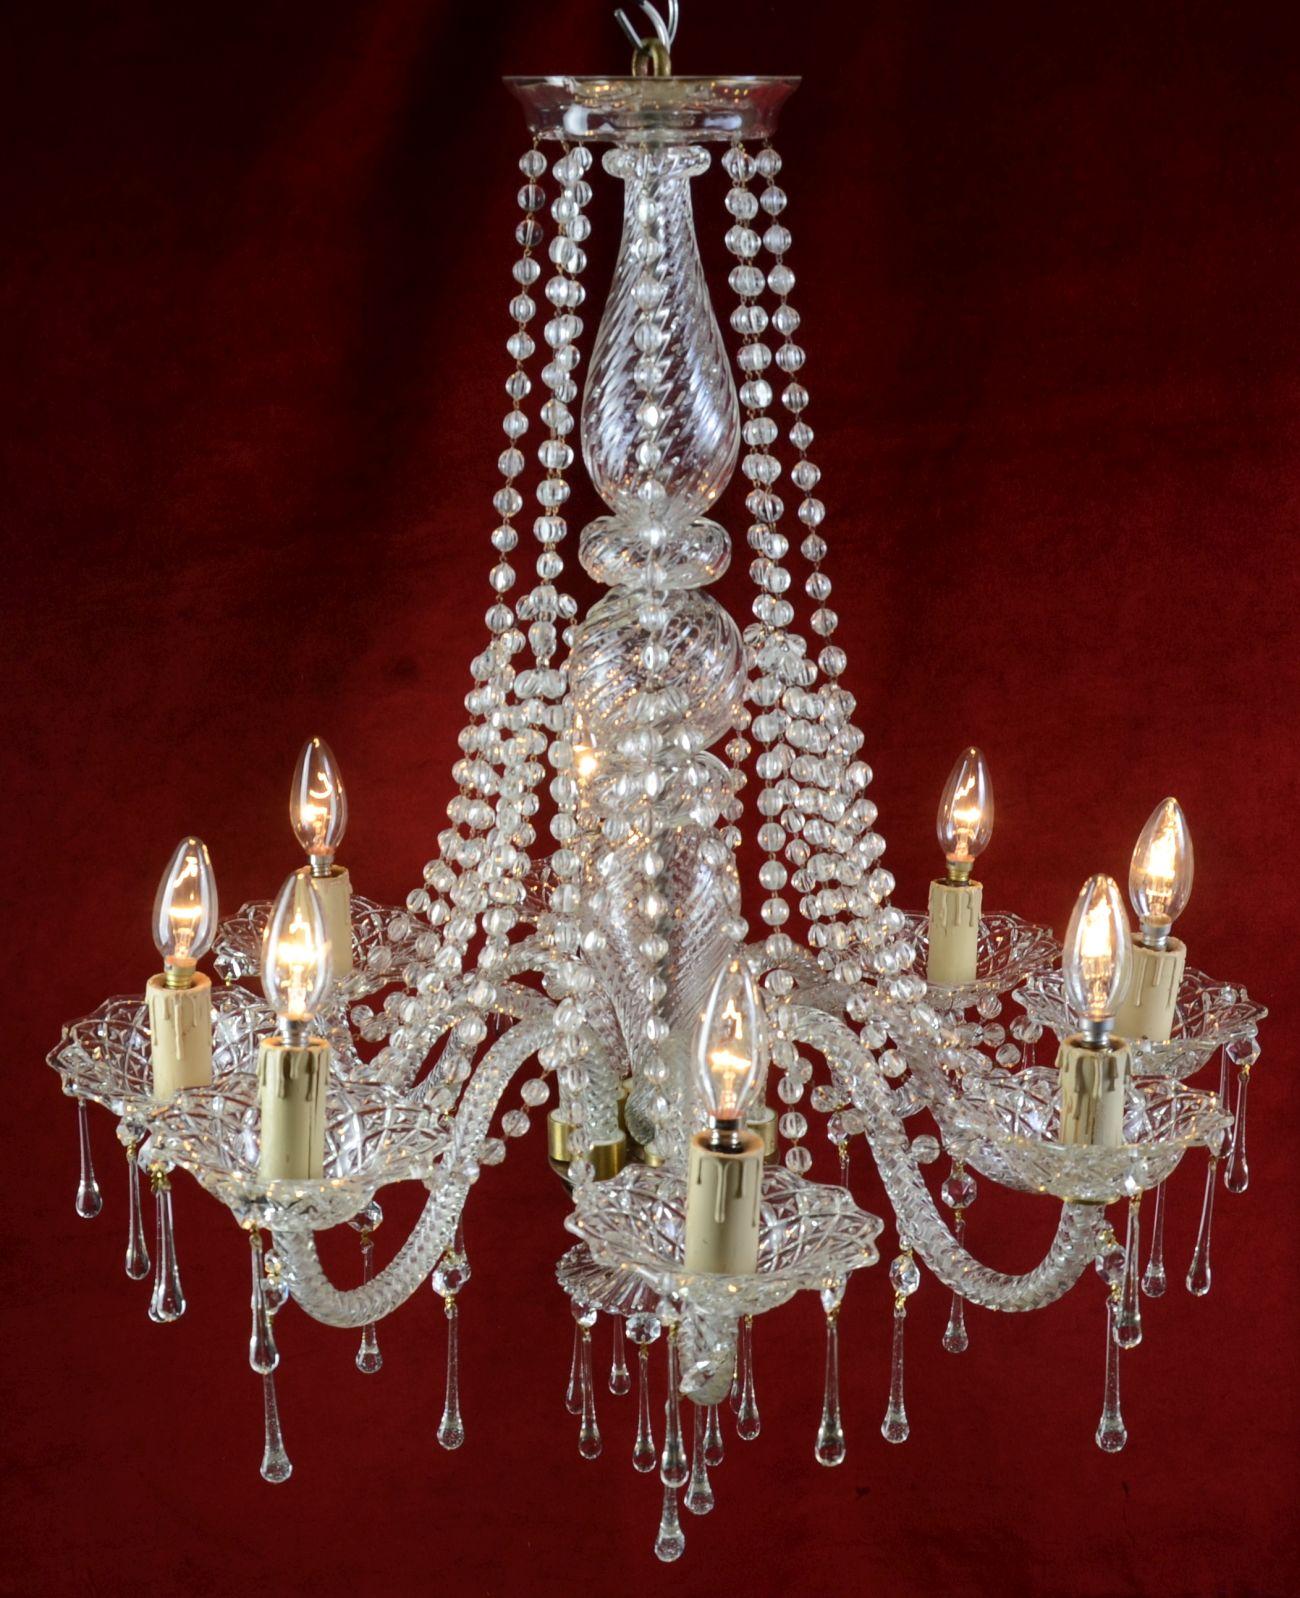 Wonderful chandelier made in the style of Marie Terese. This item comes from Spain from the 1930s.

It was made with the utmost care. From the inside comes eight arms, which are made of transparent glass, and each of them is finished with a